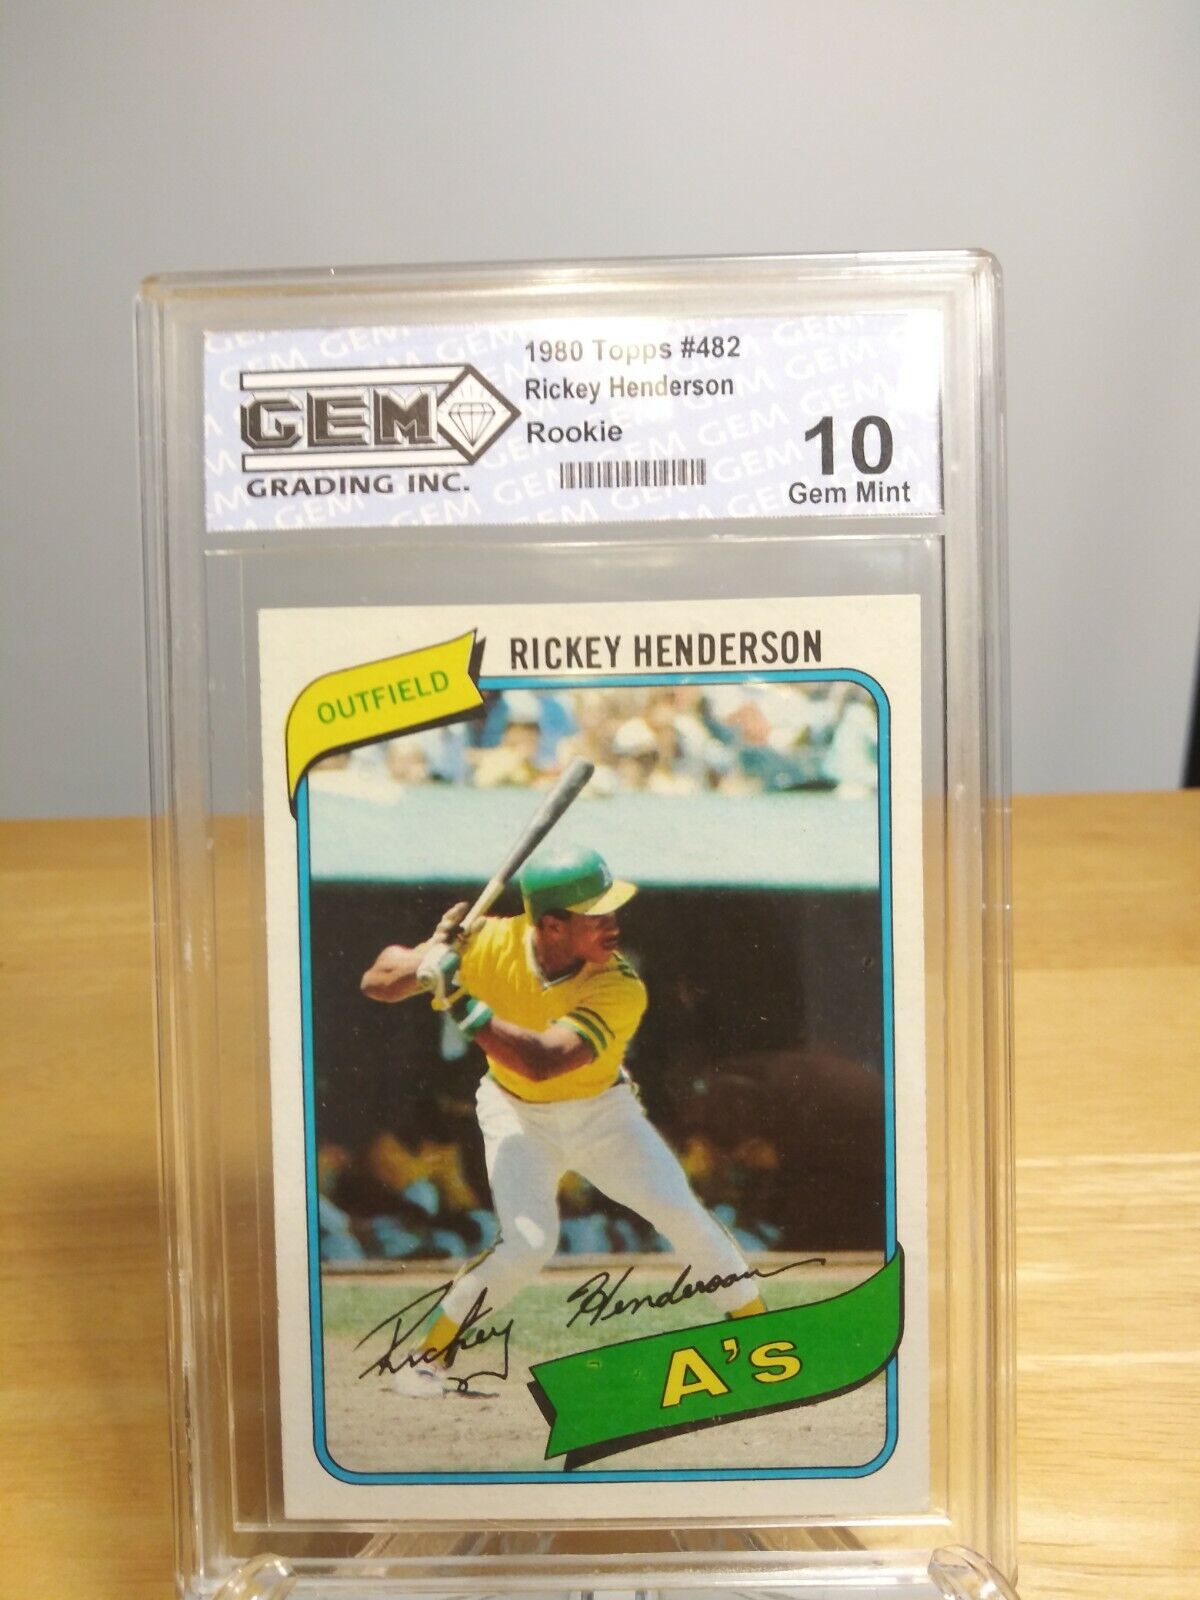 RICKEY HENDERSON RC 1980 TOPPS #482 ROOKIE OAKLAND A\'S GEM MINT 10